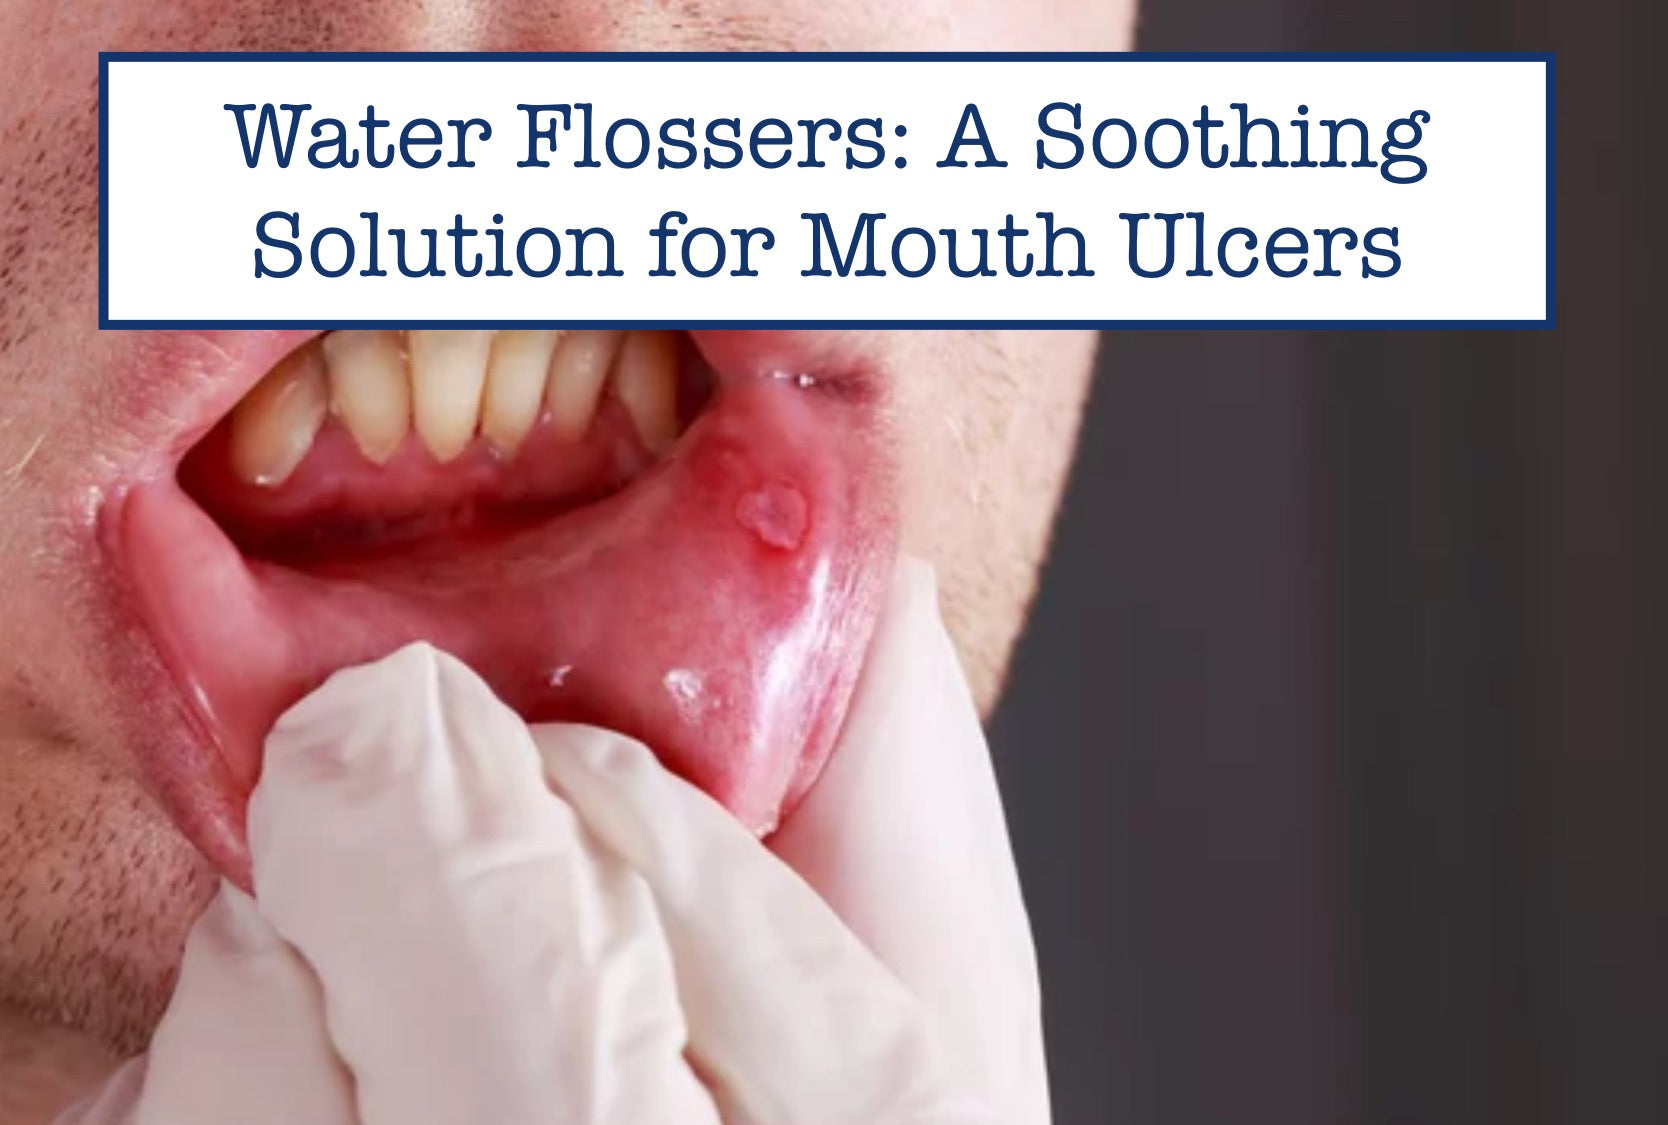 Water Flossers: A Soothing Solution for Mouth Ulcers